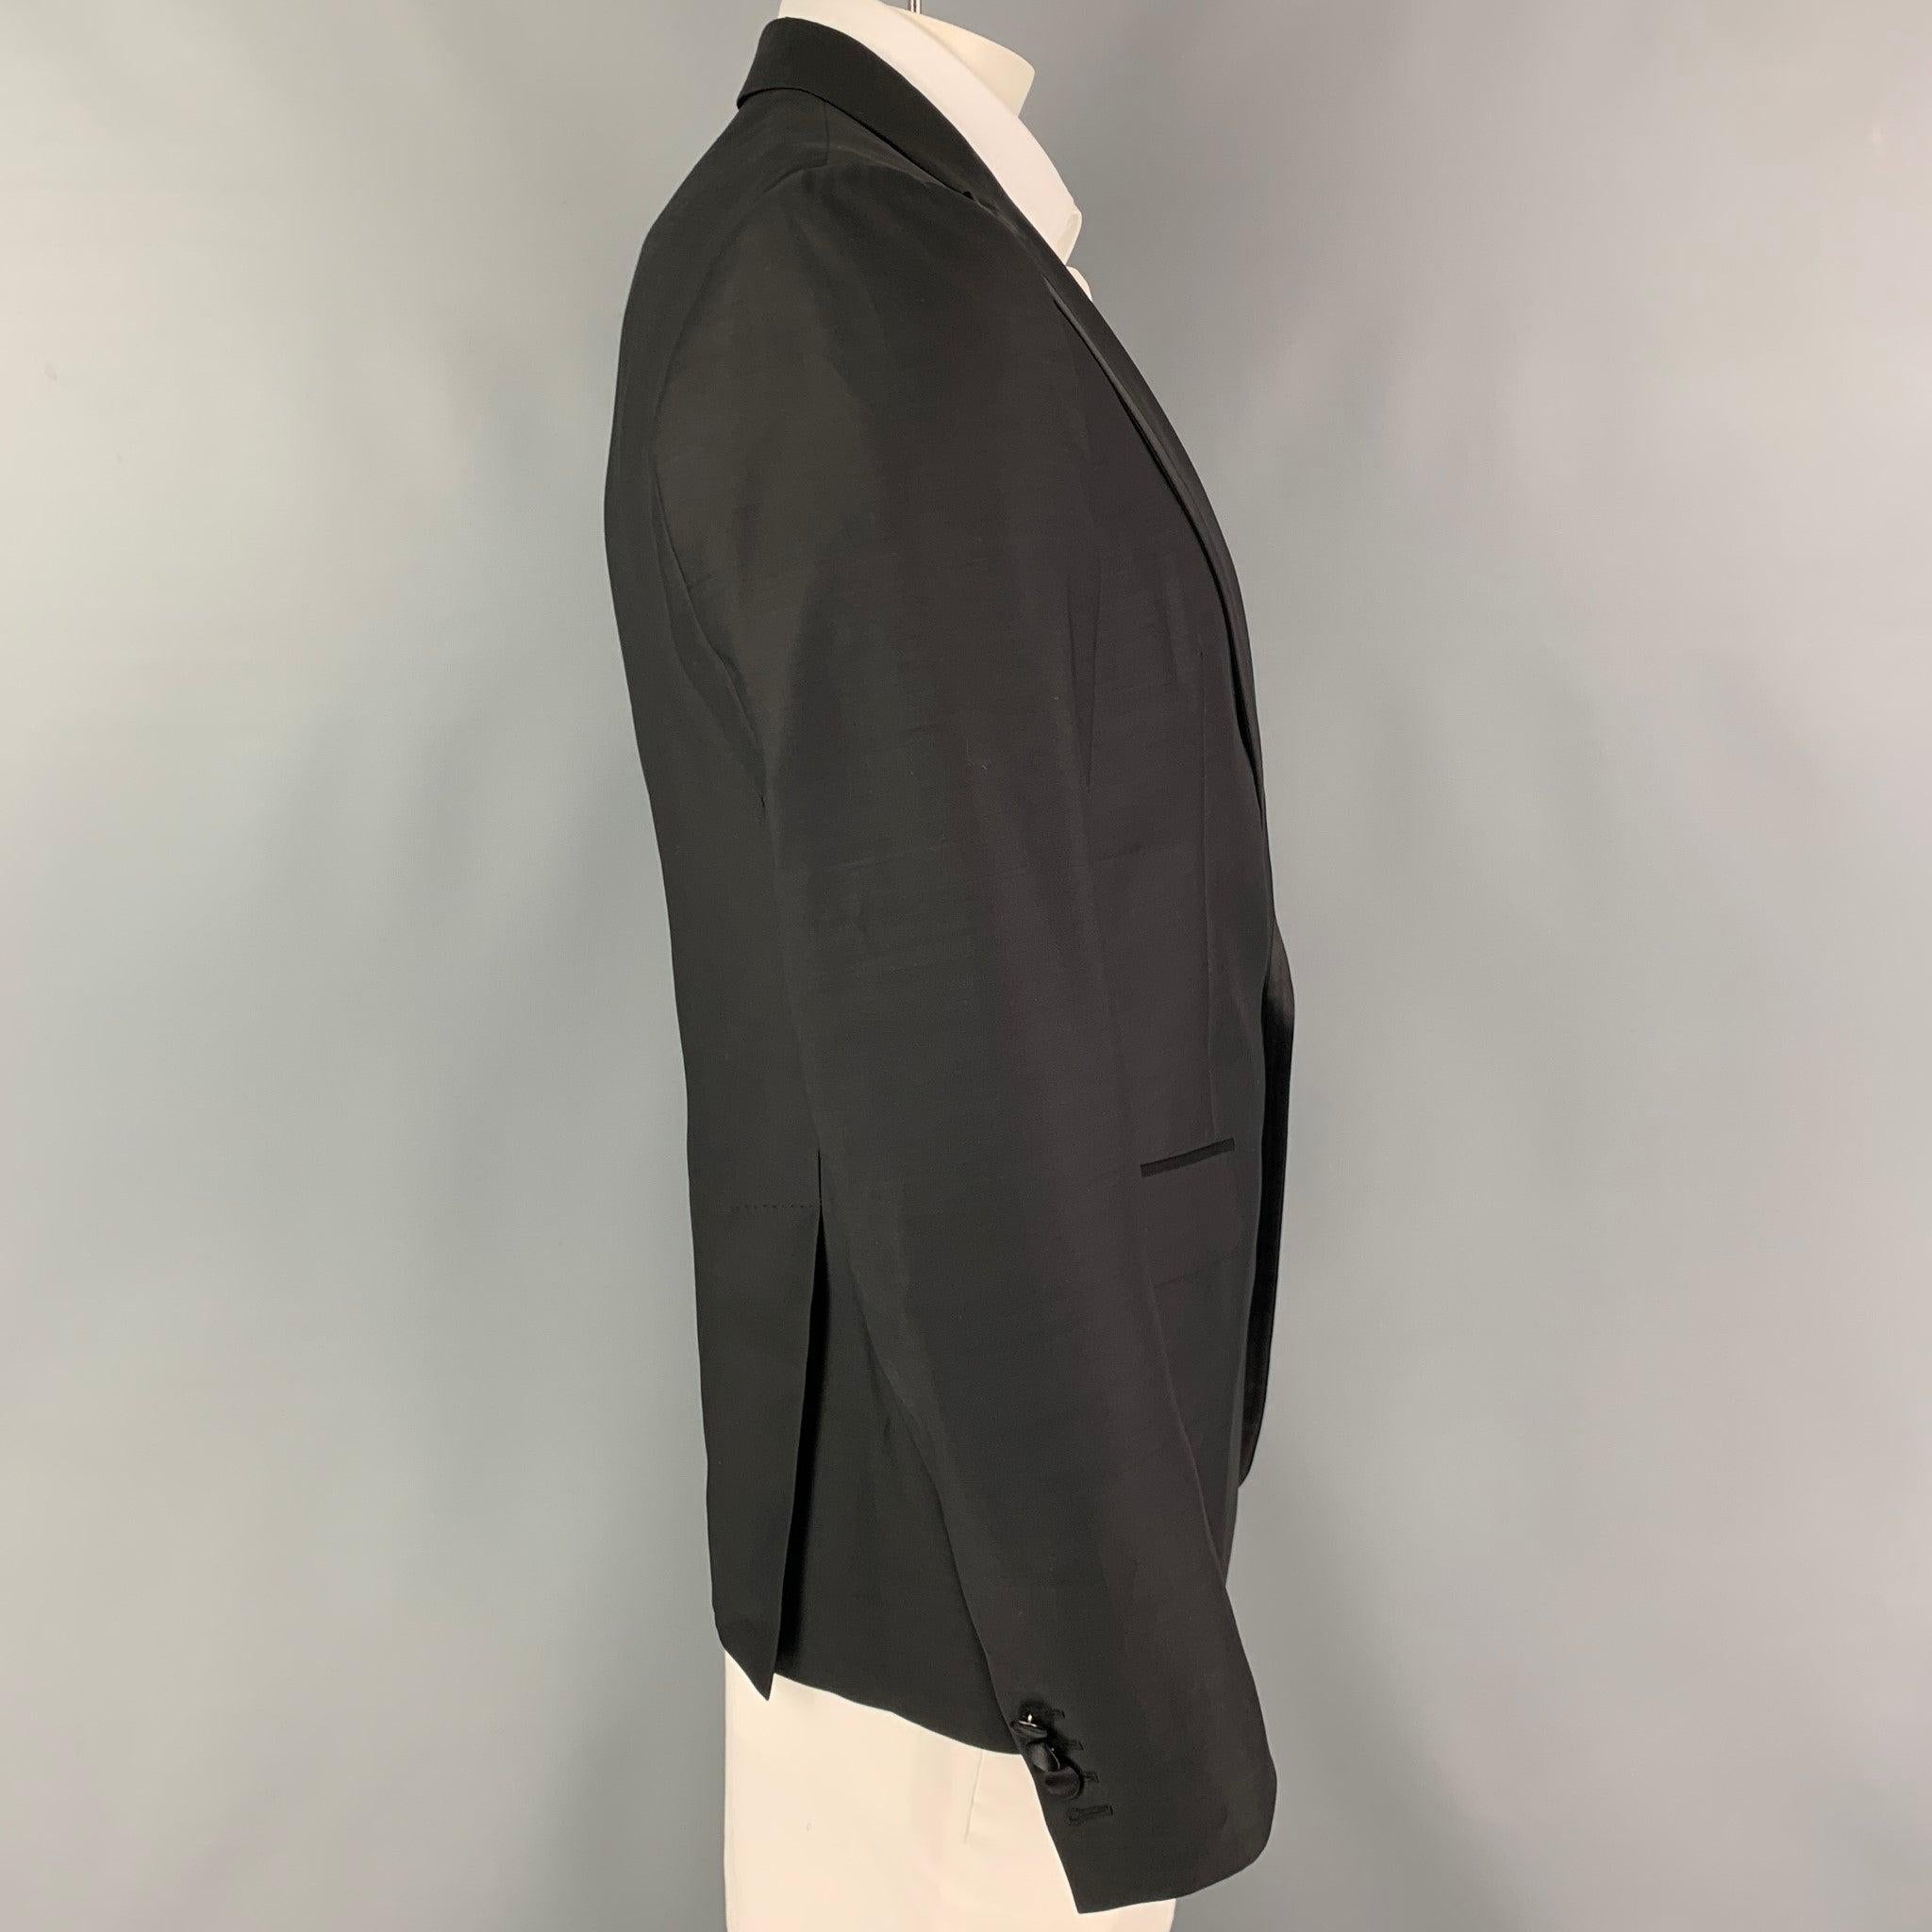 DSQUARED2 sport coat comes in a black wool / silk with a half liner featuring a peak lapel, flap pockets, double back vent, and a double button closure. Made in Italy.
Excellent
Pre-Owned Condition. 

Marked:   52 

Measurements: 
 
Shoulder: 18